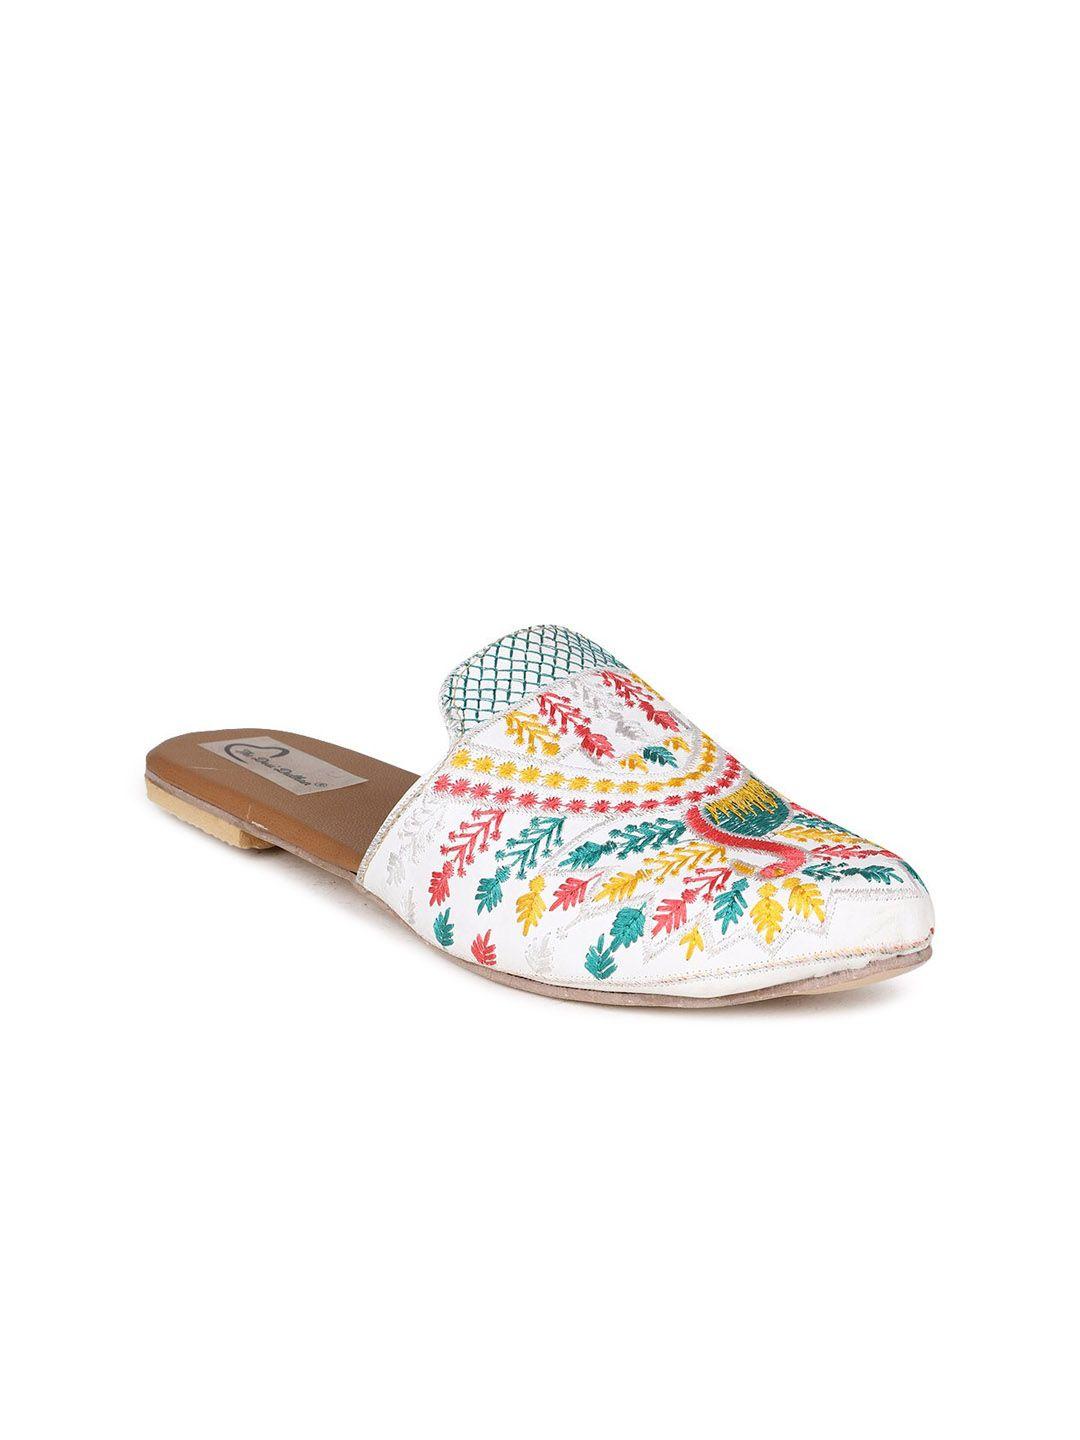 the desi dulhan women embroidered ethnic mules flats